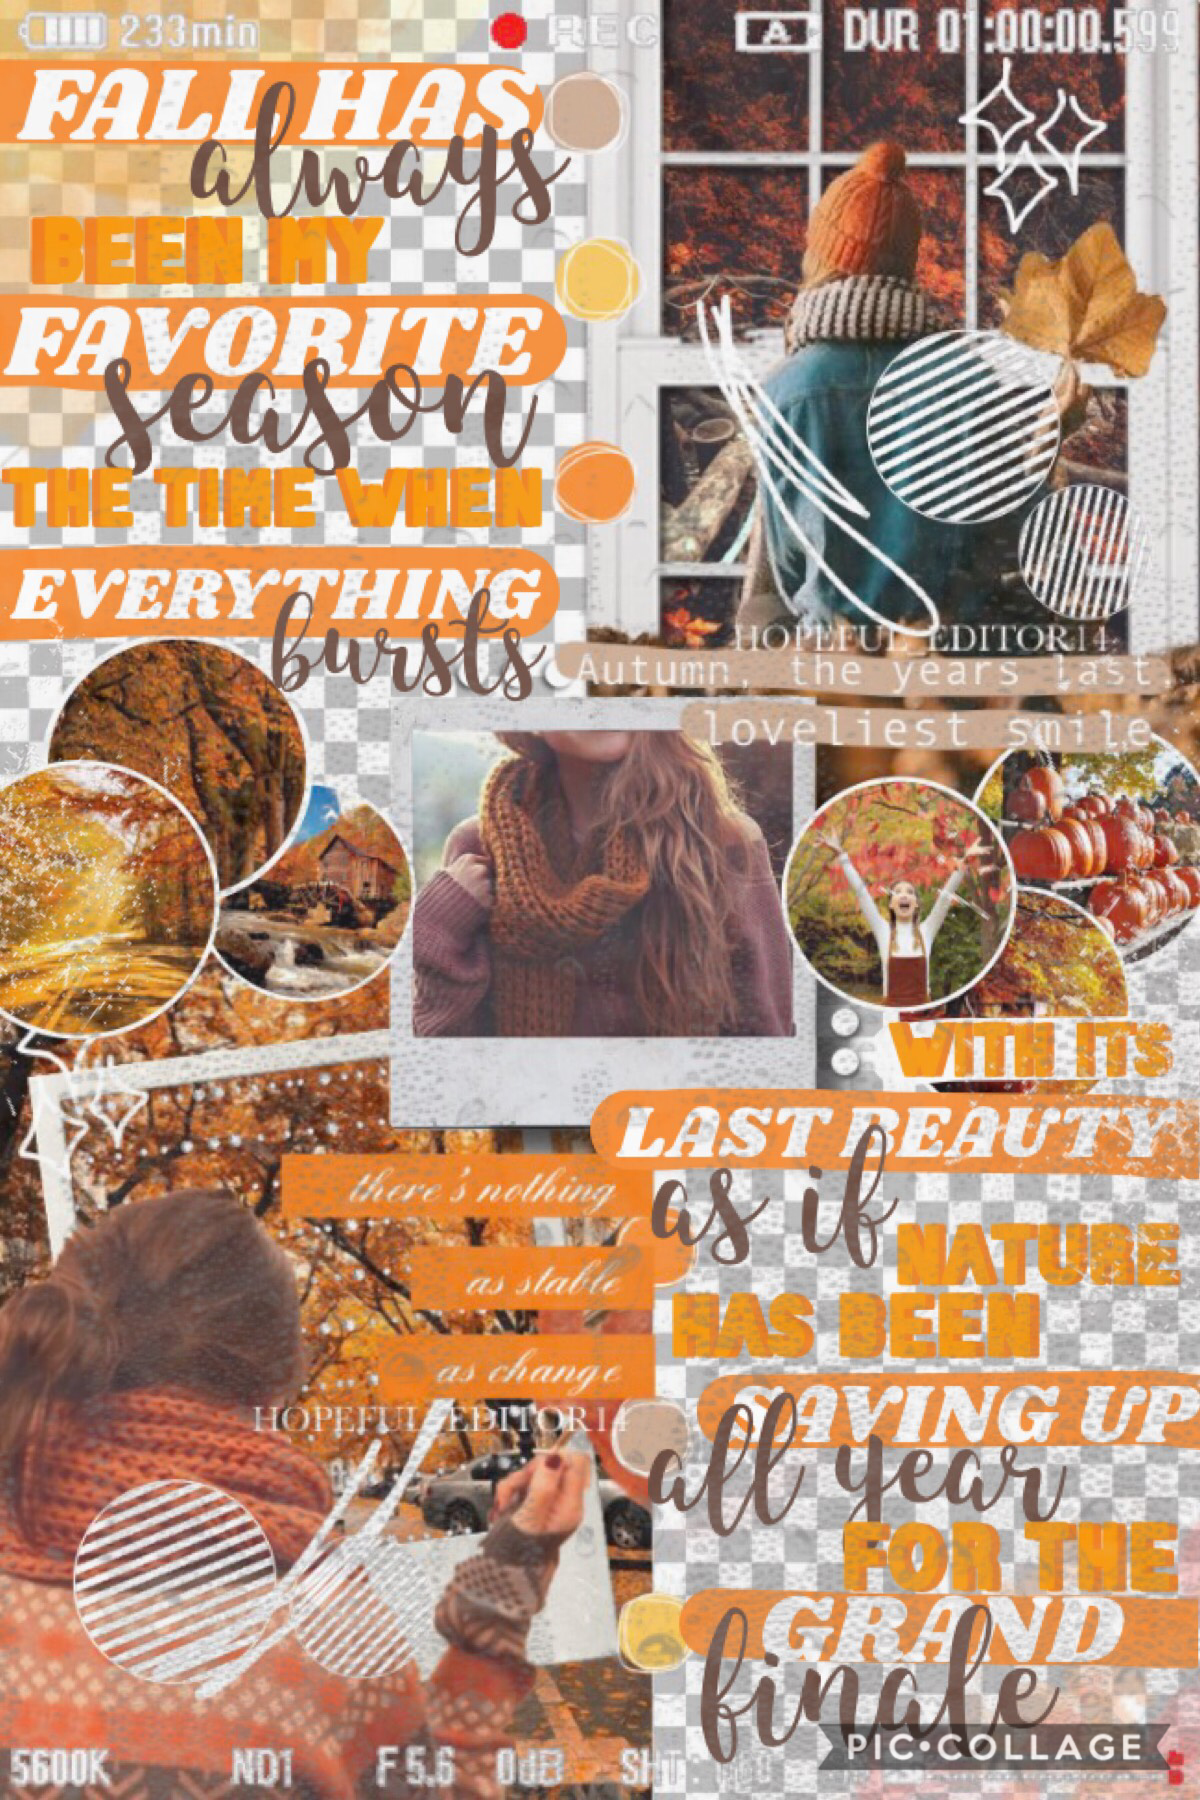 Entry into PicCollage’s fall contest! Please like it in my remixes!!! Last chance to enter my icon contest! I would love to see some new entries when I wake up tomorrow!